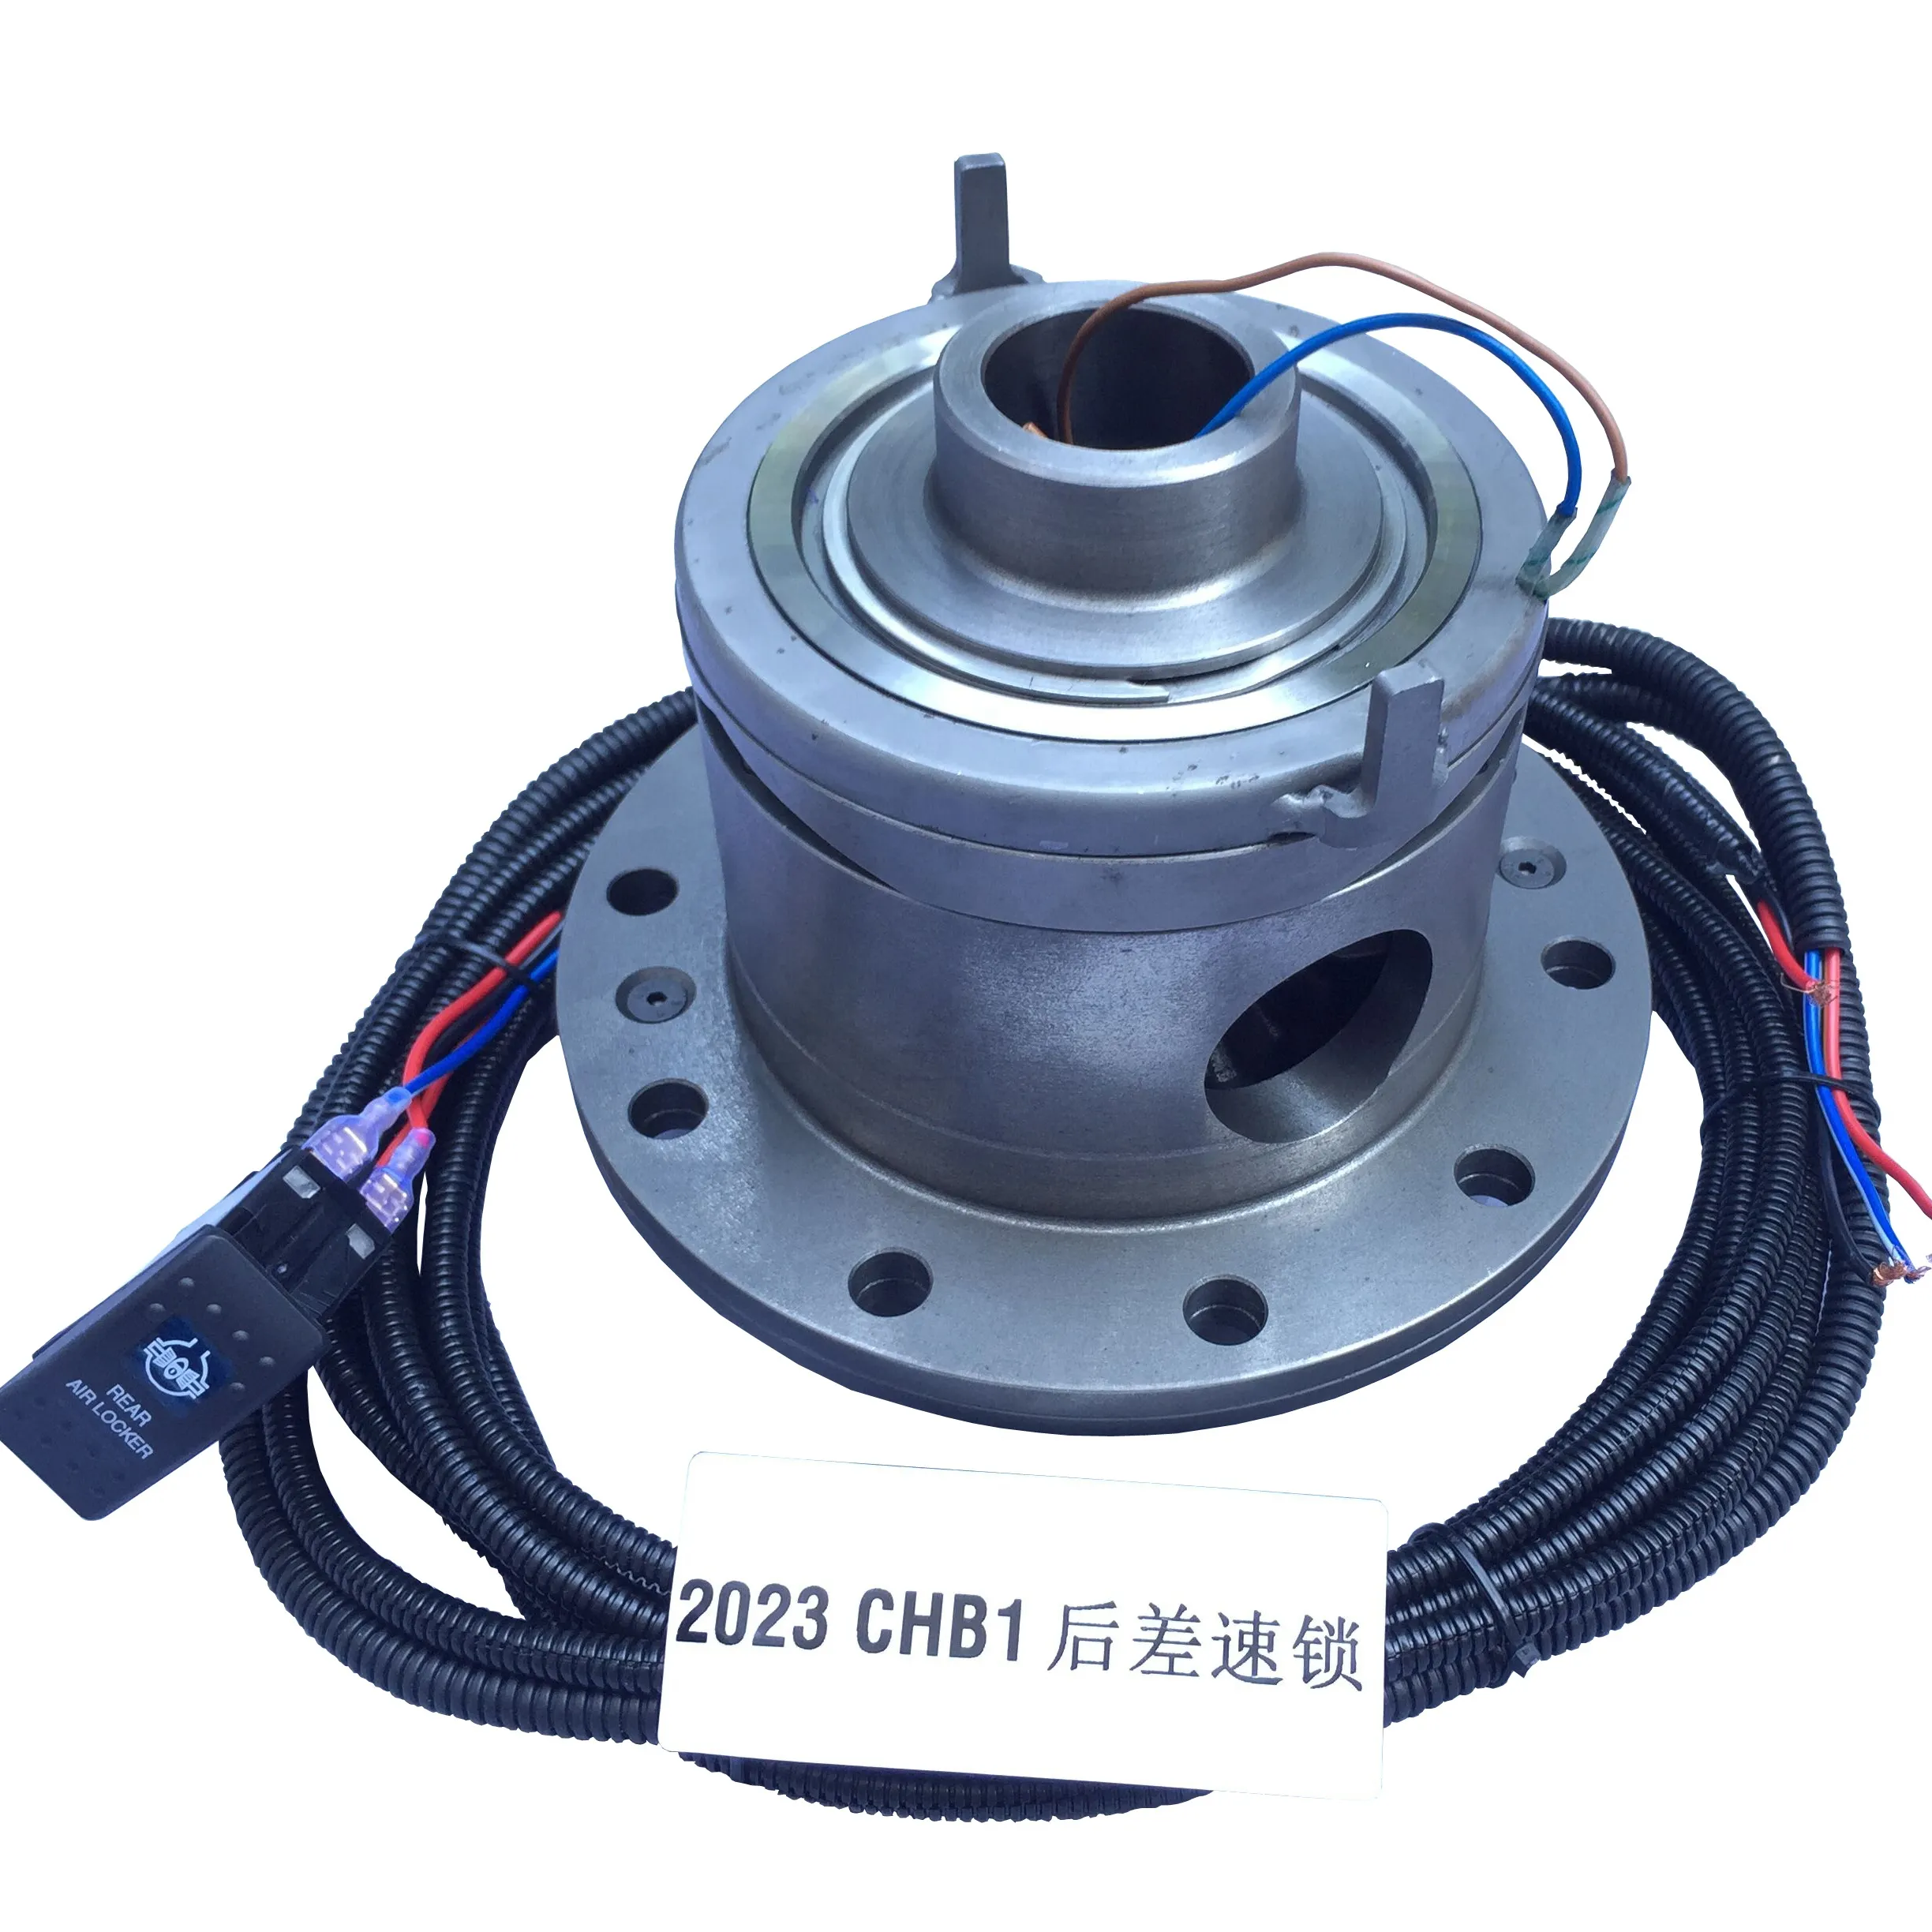 Arb compressor and HF best 4x4 accessories  ET132 auto  differential locker with top quality in china